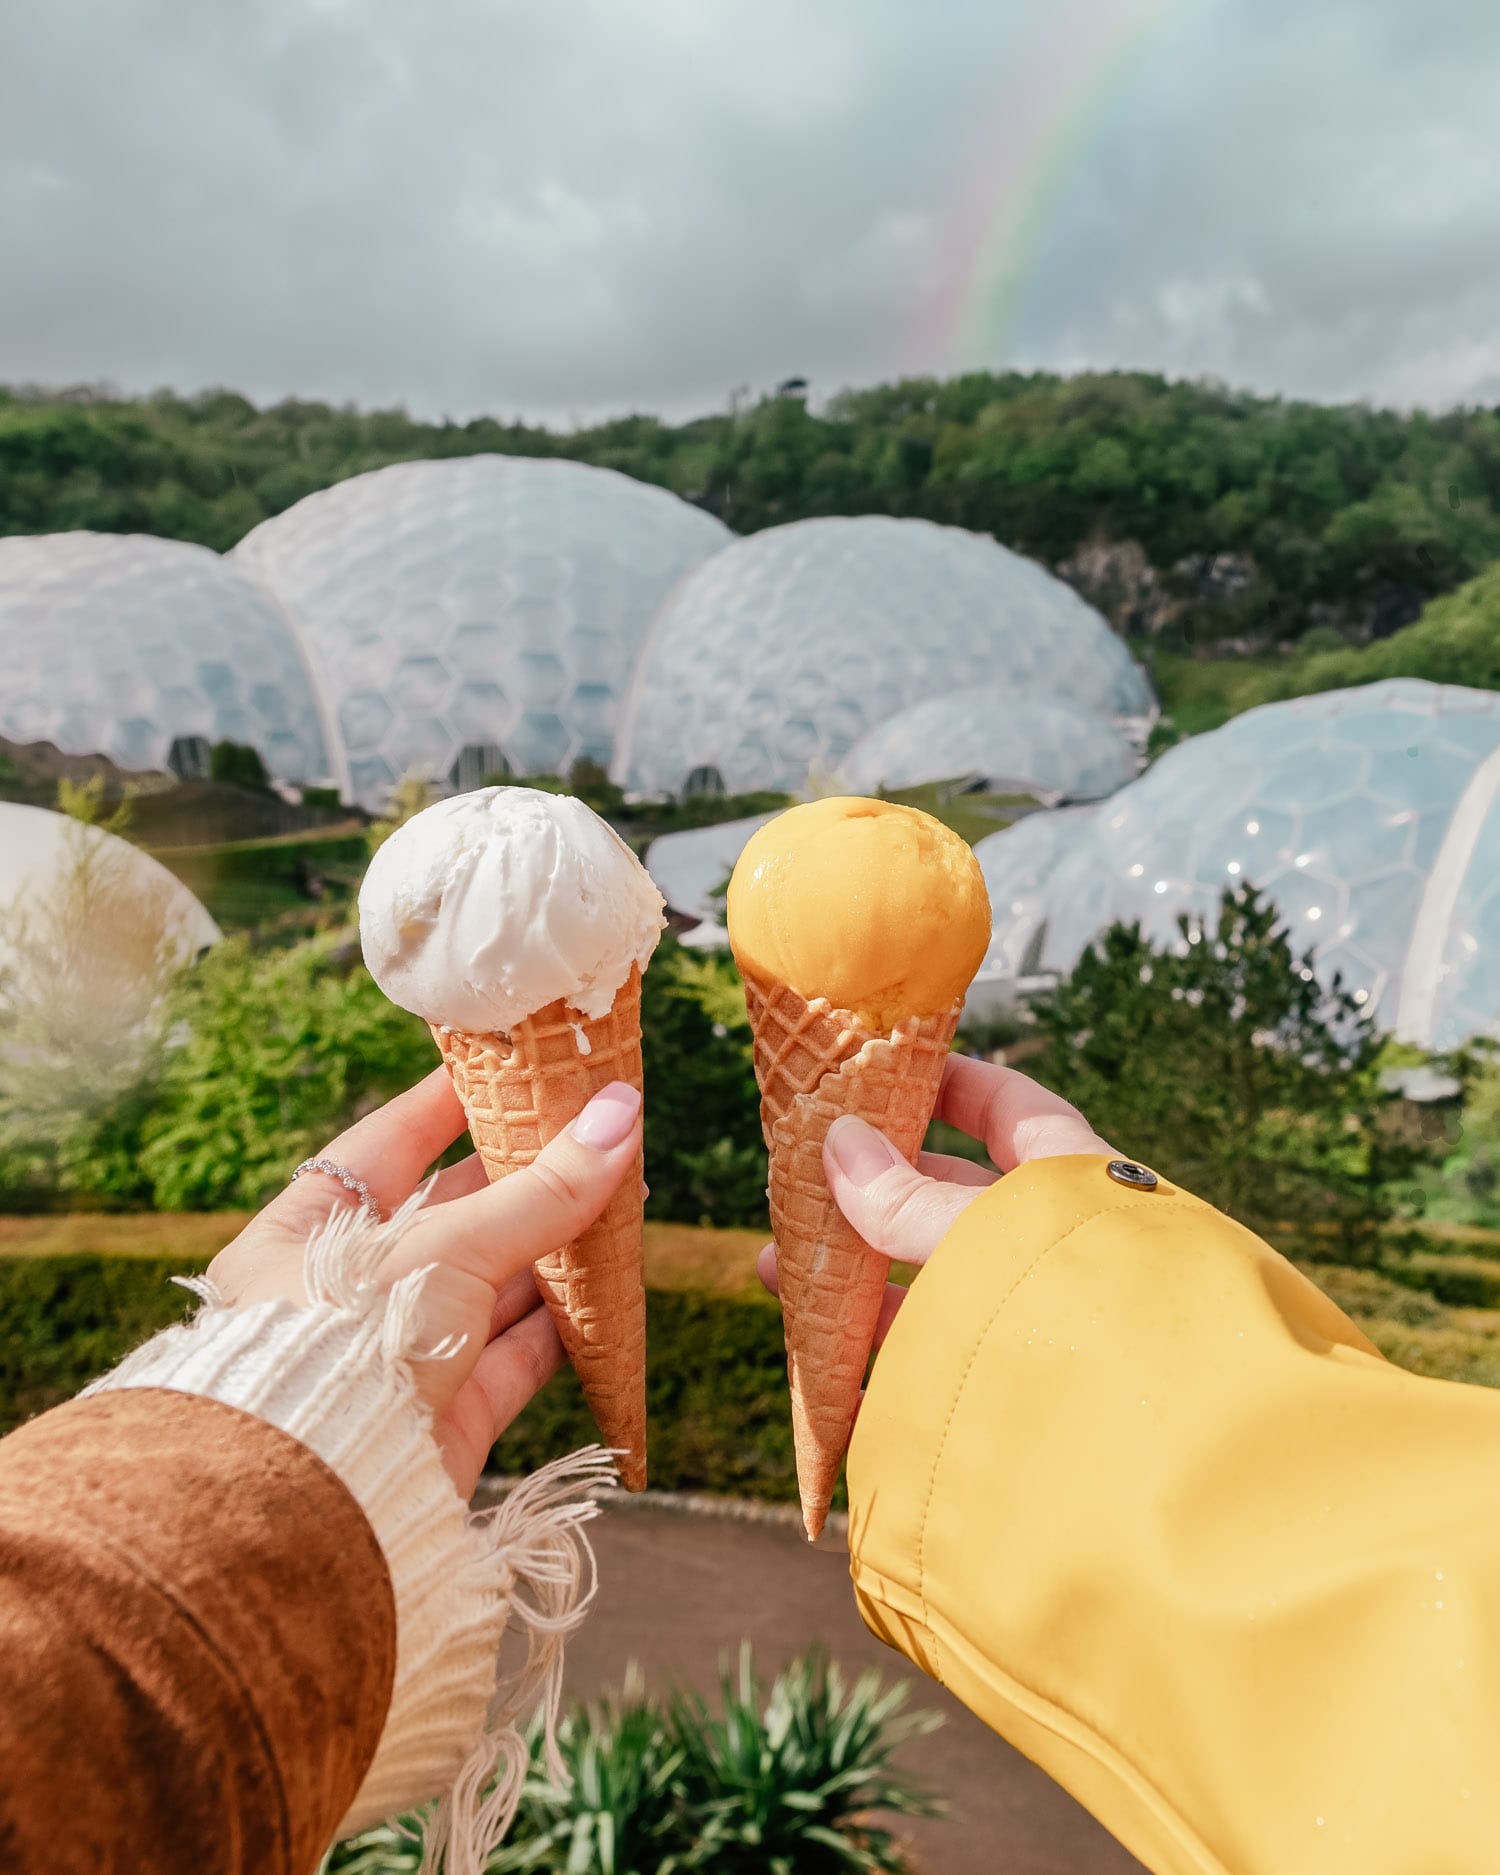 Instagrammable Ice Creams at Eden Project in Cornwall, UK